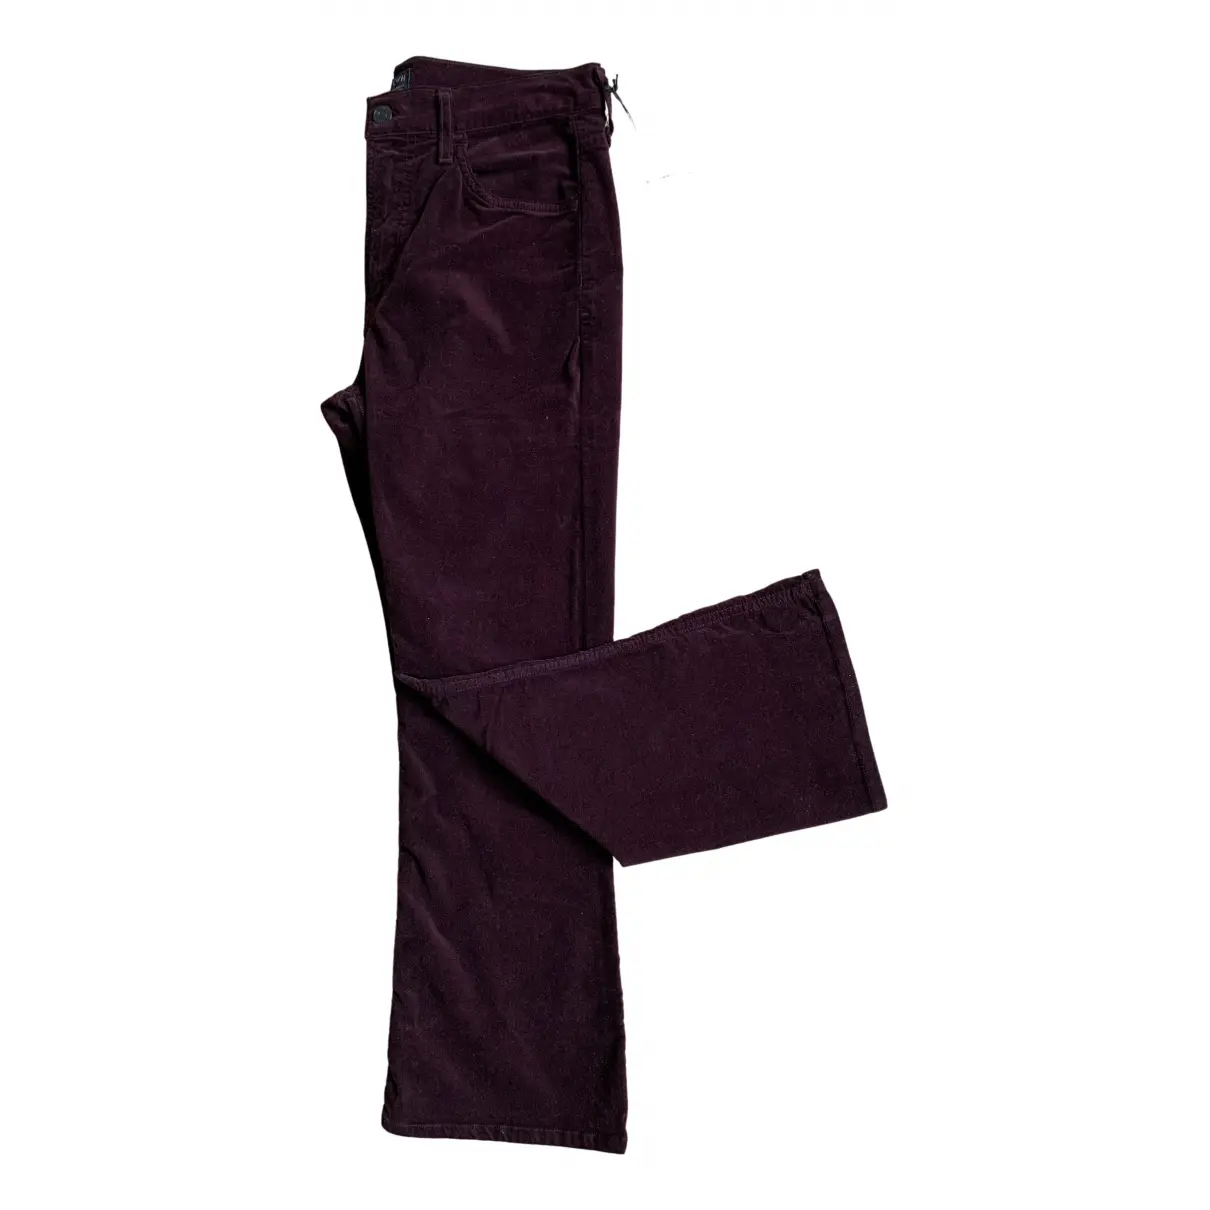 Buy Citizens Of Humanity Burgundy Cotton Jeans online